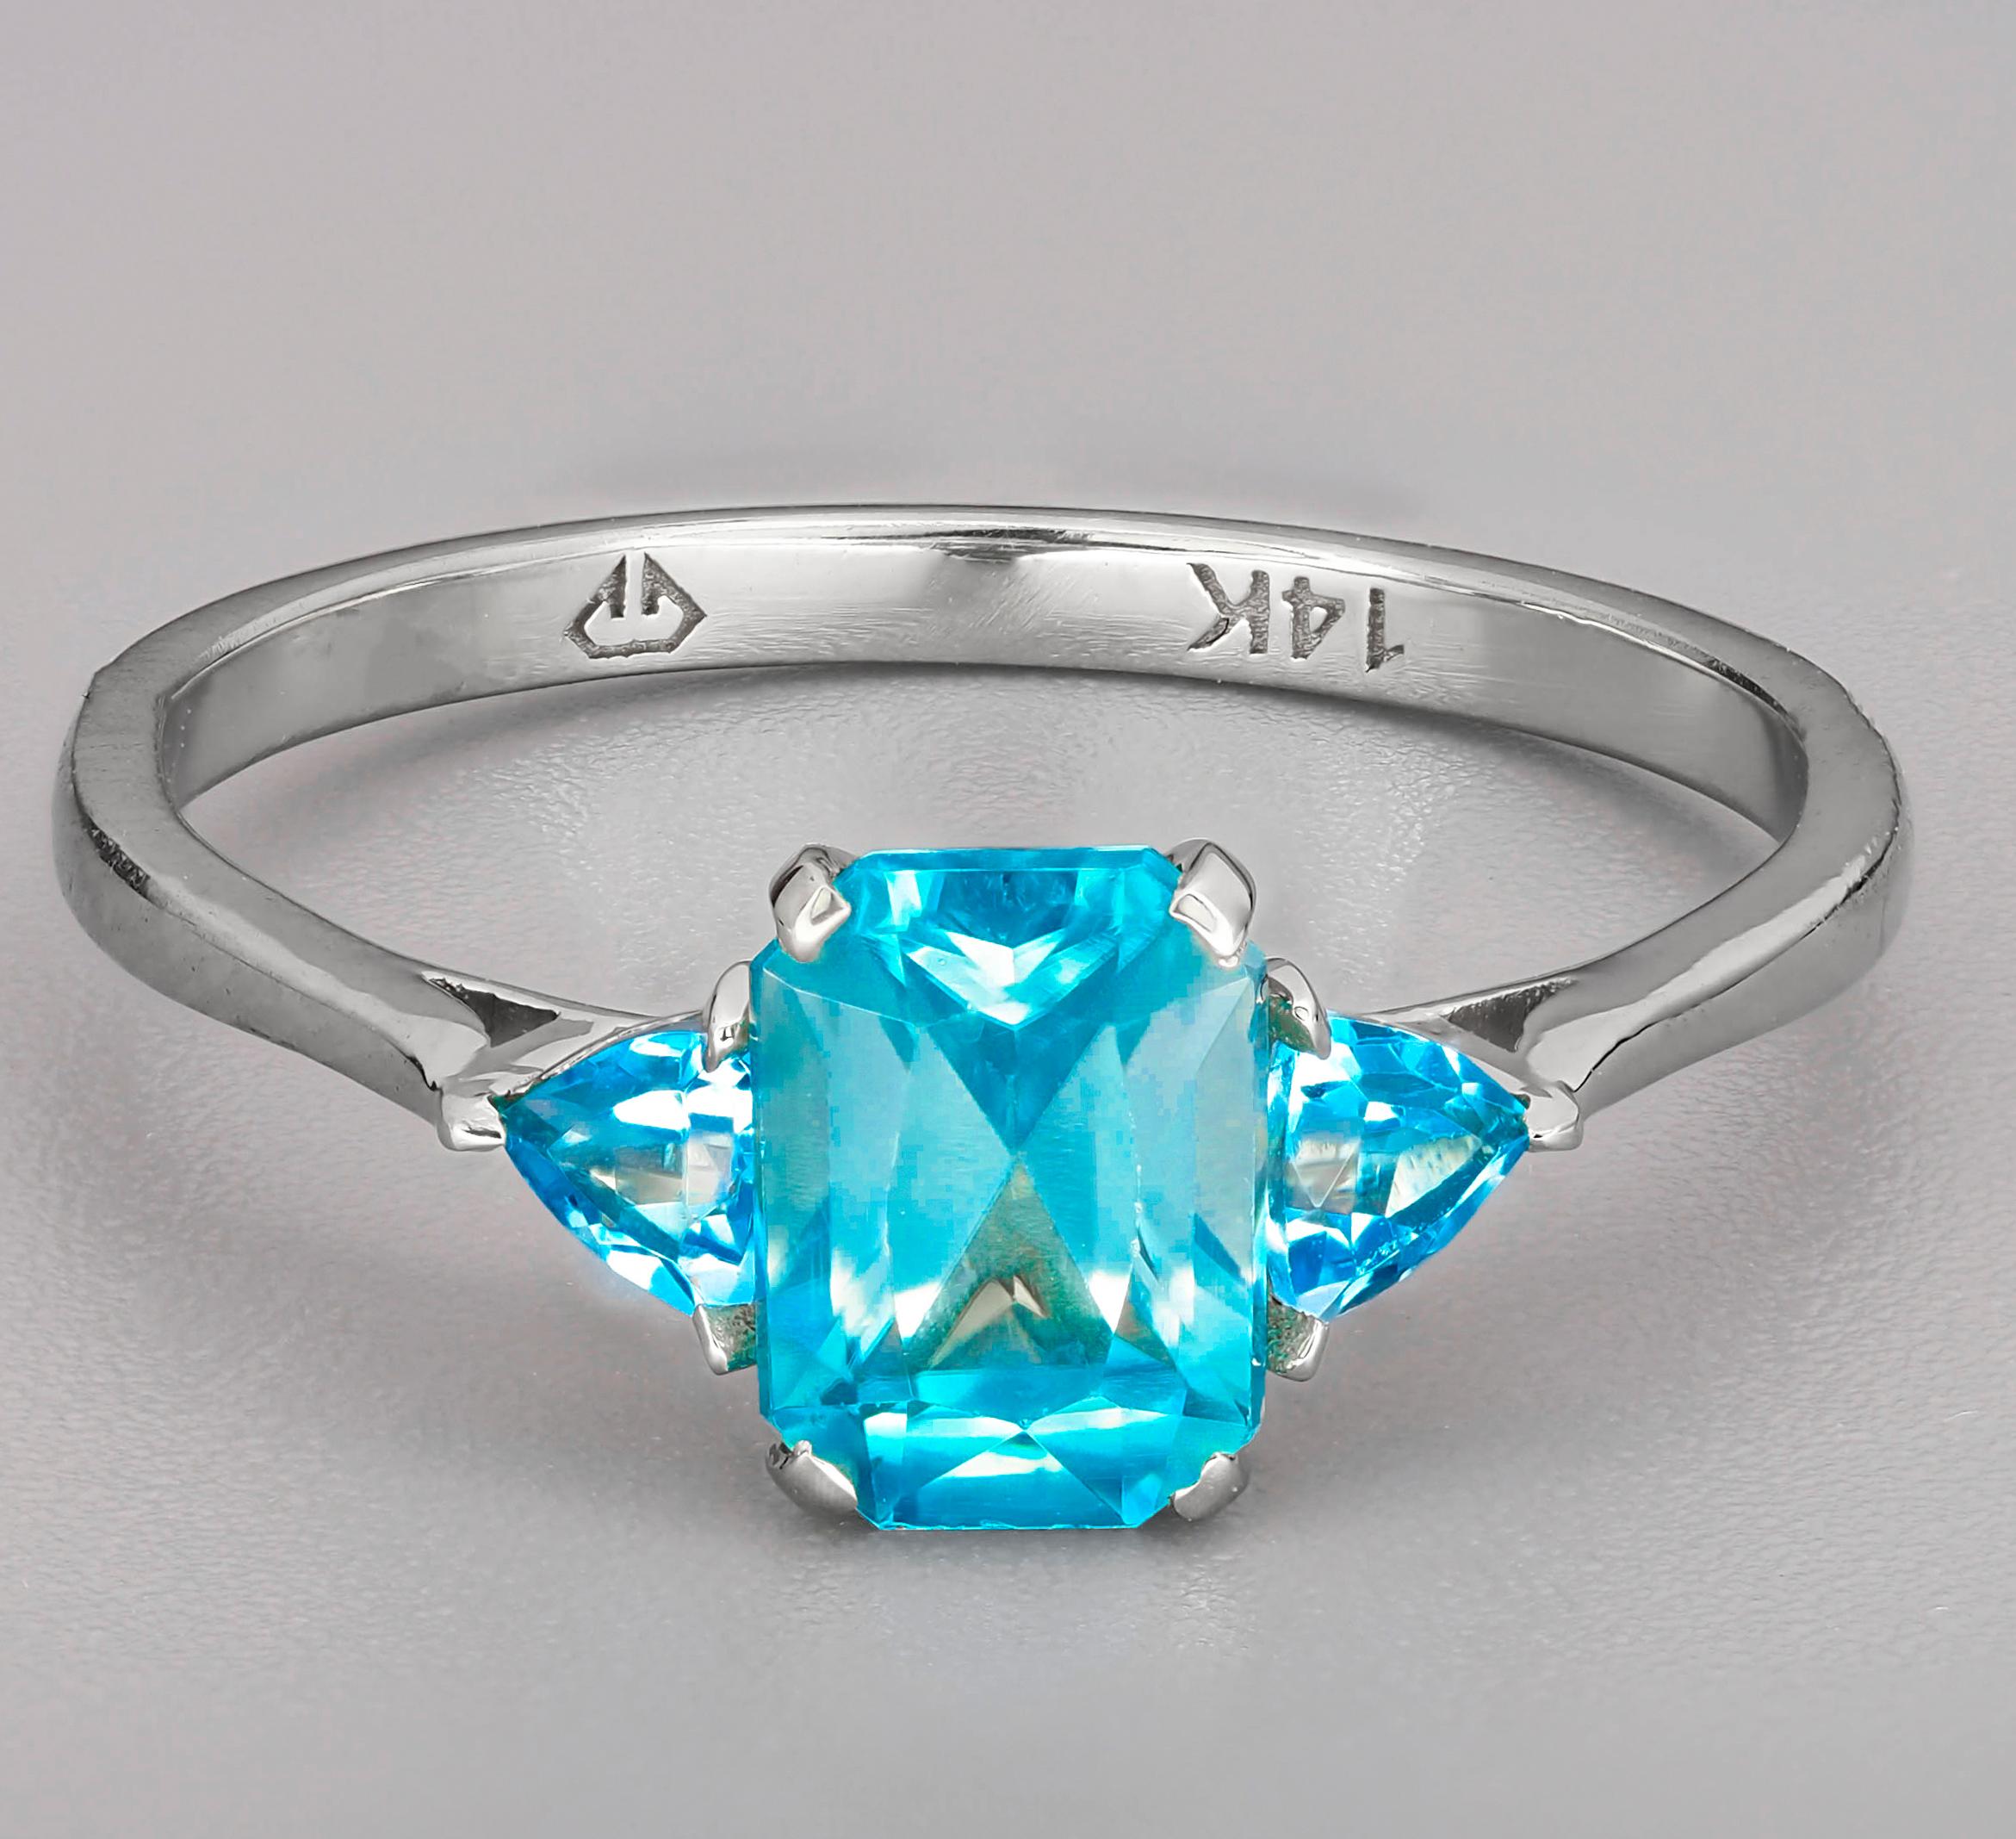 Swiss Blue Topaz 14k Gold Ring. 
November Birthstone Ring. Octagon topaz ring. 3 gemstone gold ring. Blue gemstone ring. Casual gold ring.

Metal: 14k gold
Weight: 1.8 g. depends from size.

Set with topaz, color - blue
emerald cut, aprx 0.80 ct. in